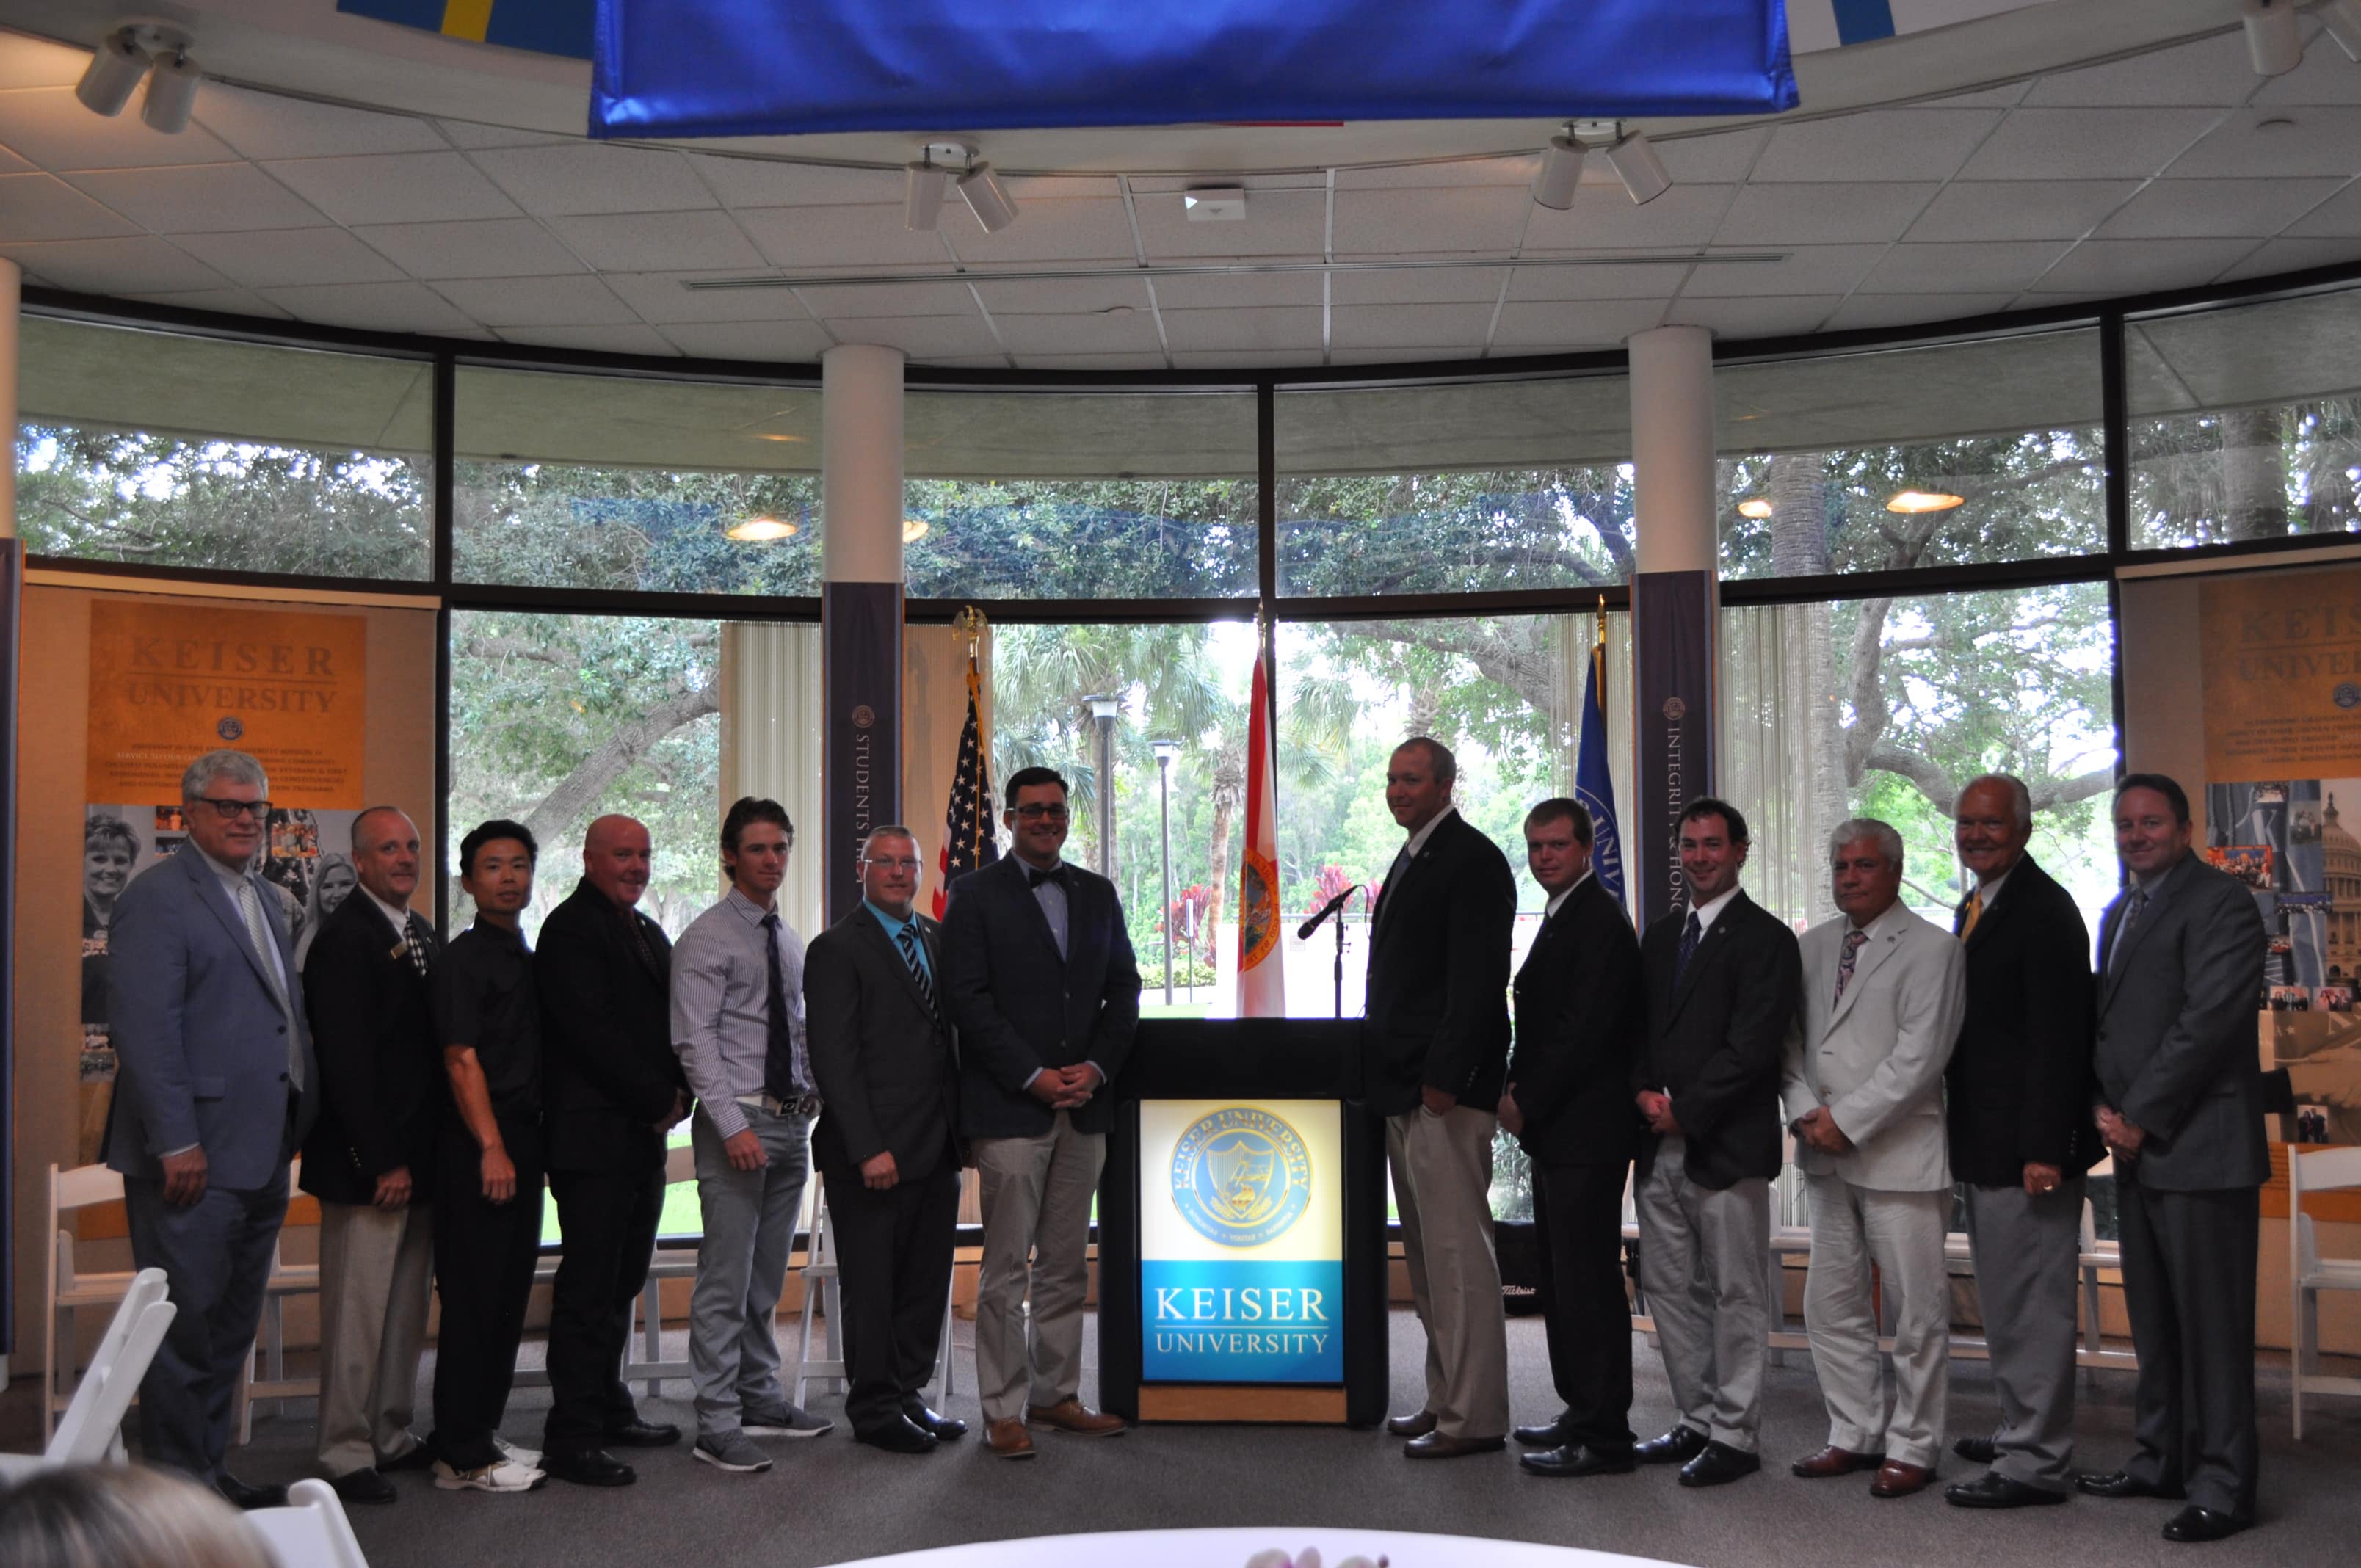 Graduates from the Keiser University Flagship Campus’ College of Golf Transition to Careers Within the Golf Industry